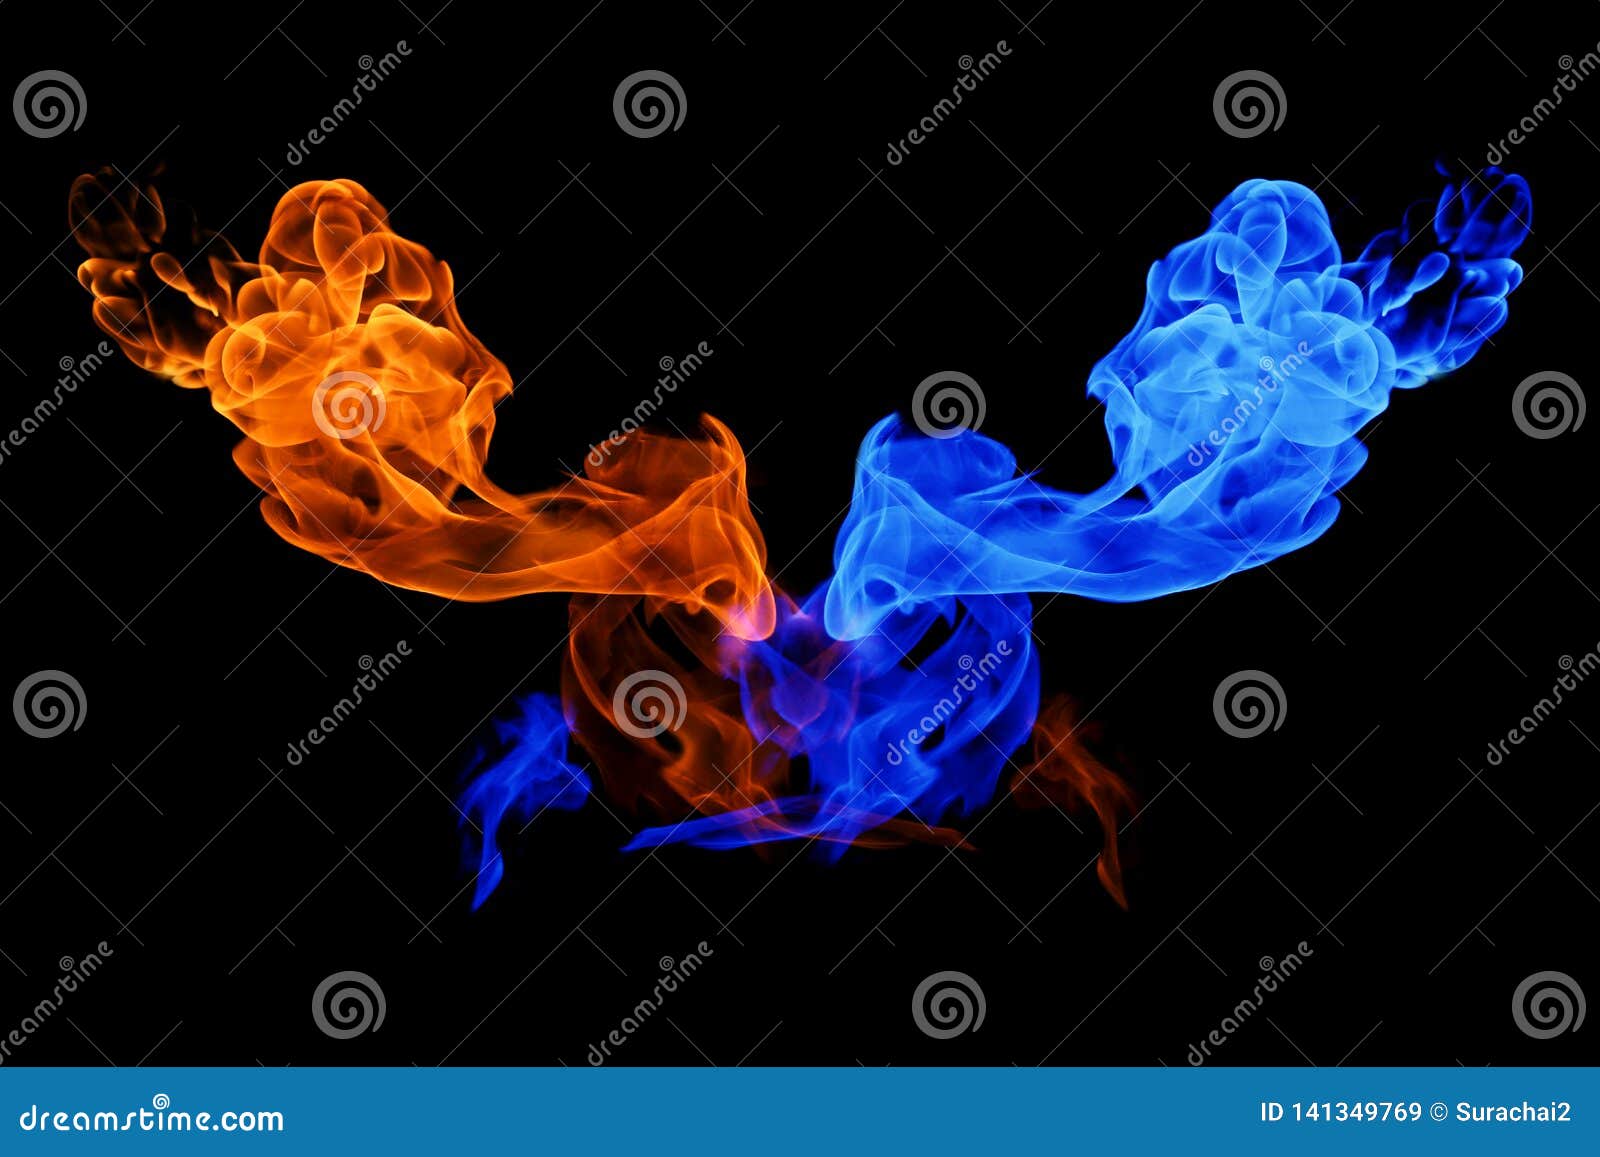 Yin Yang Symbol Fire And Ice Background Stock Image Image Of Health Esoteric